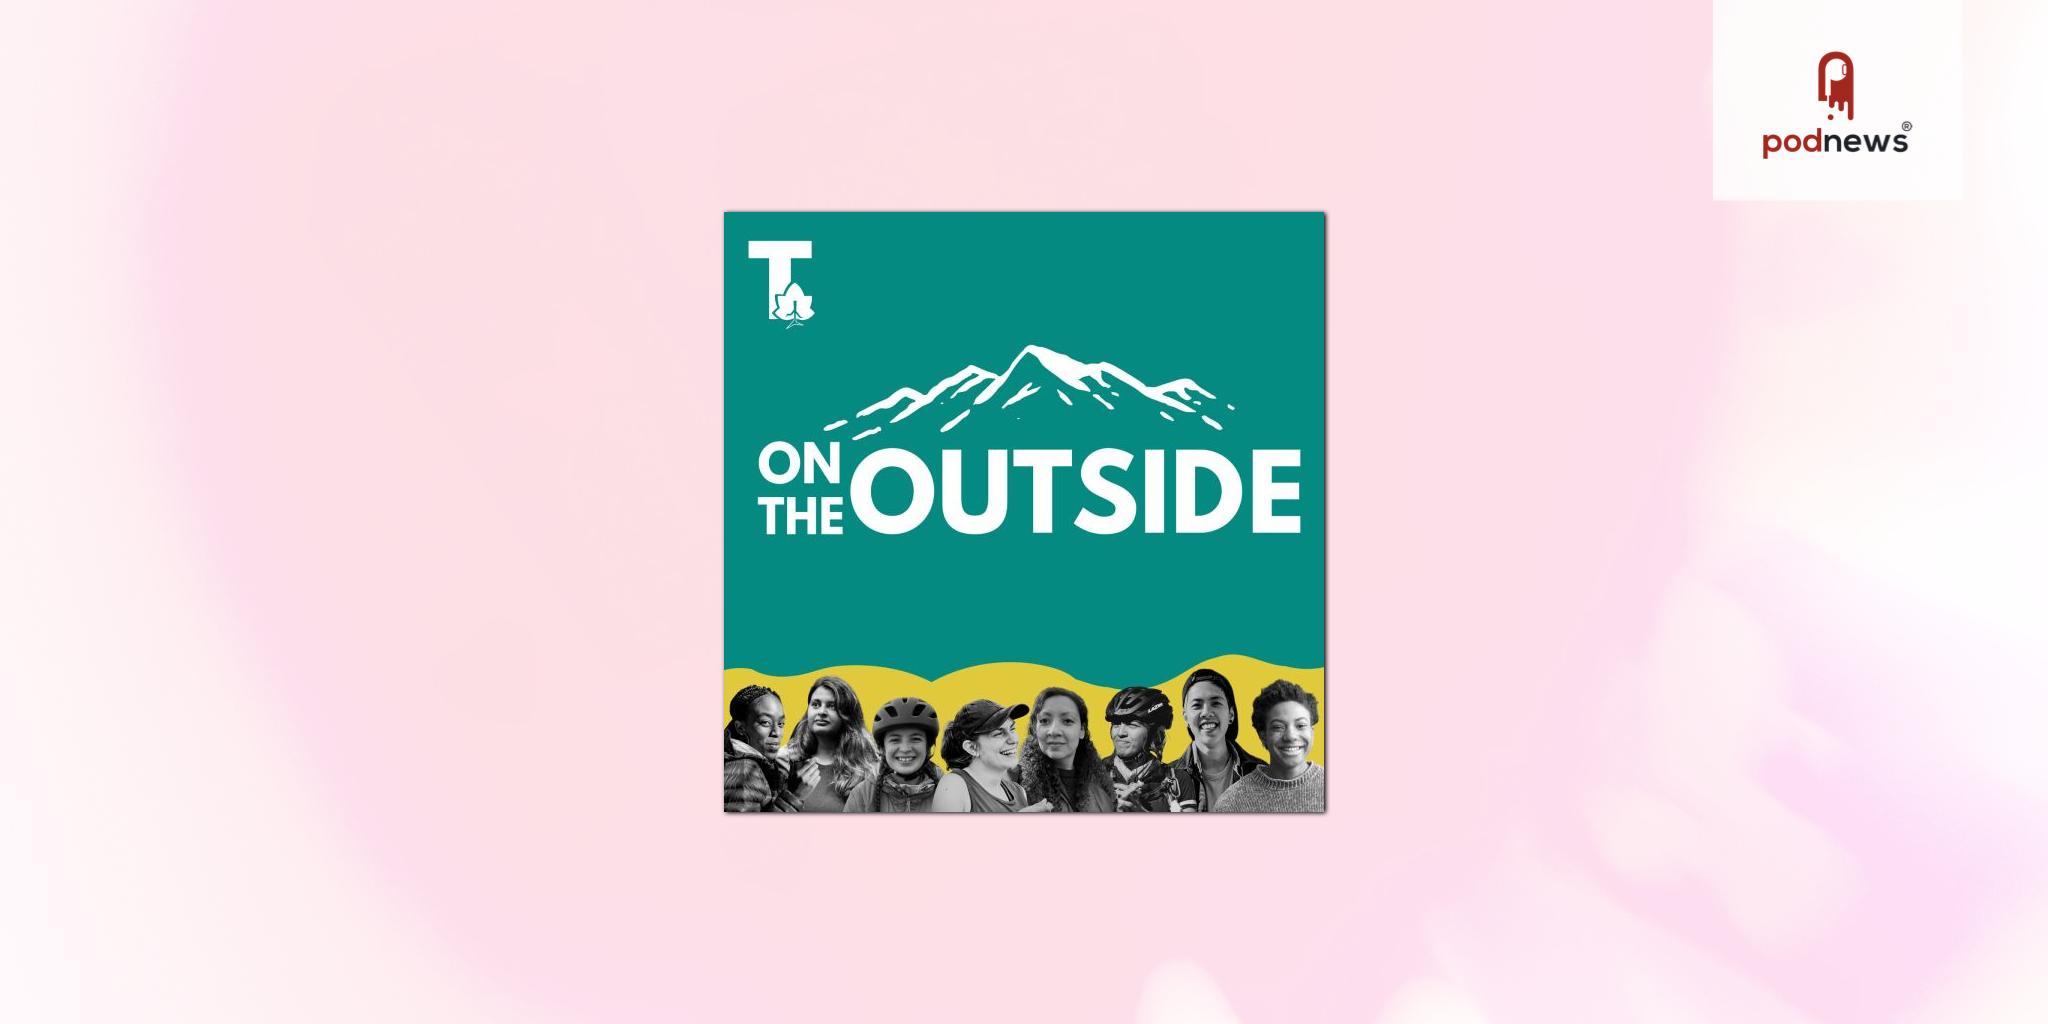 A new panel-show podcast sharing diverse views on the outdoors news in the UK